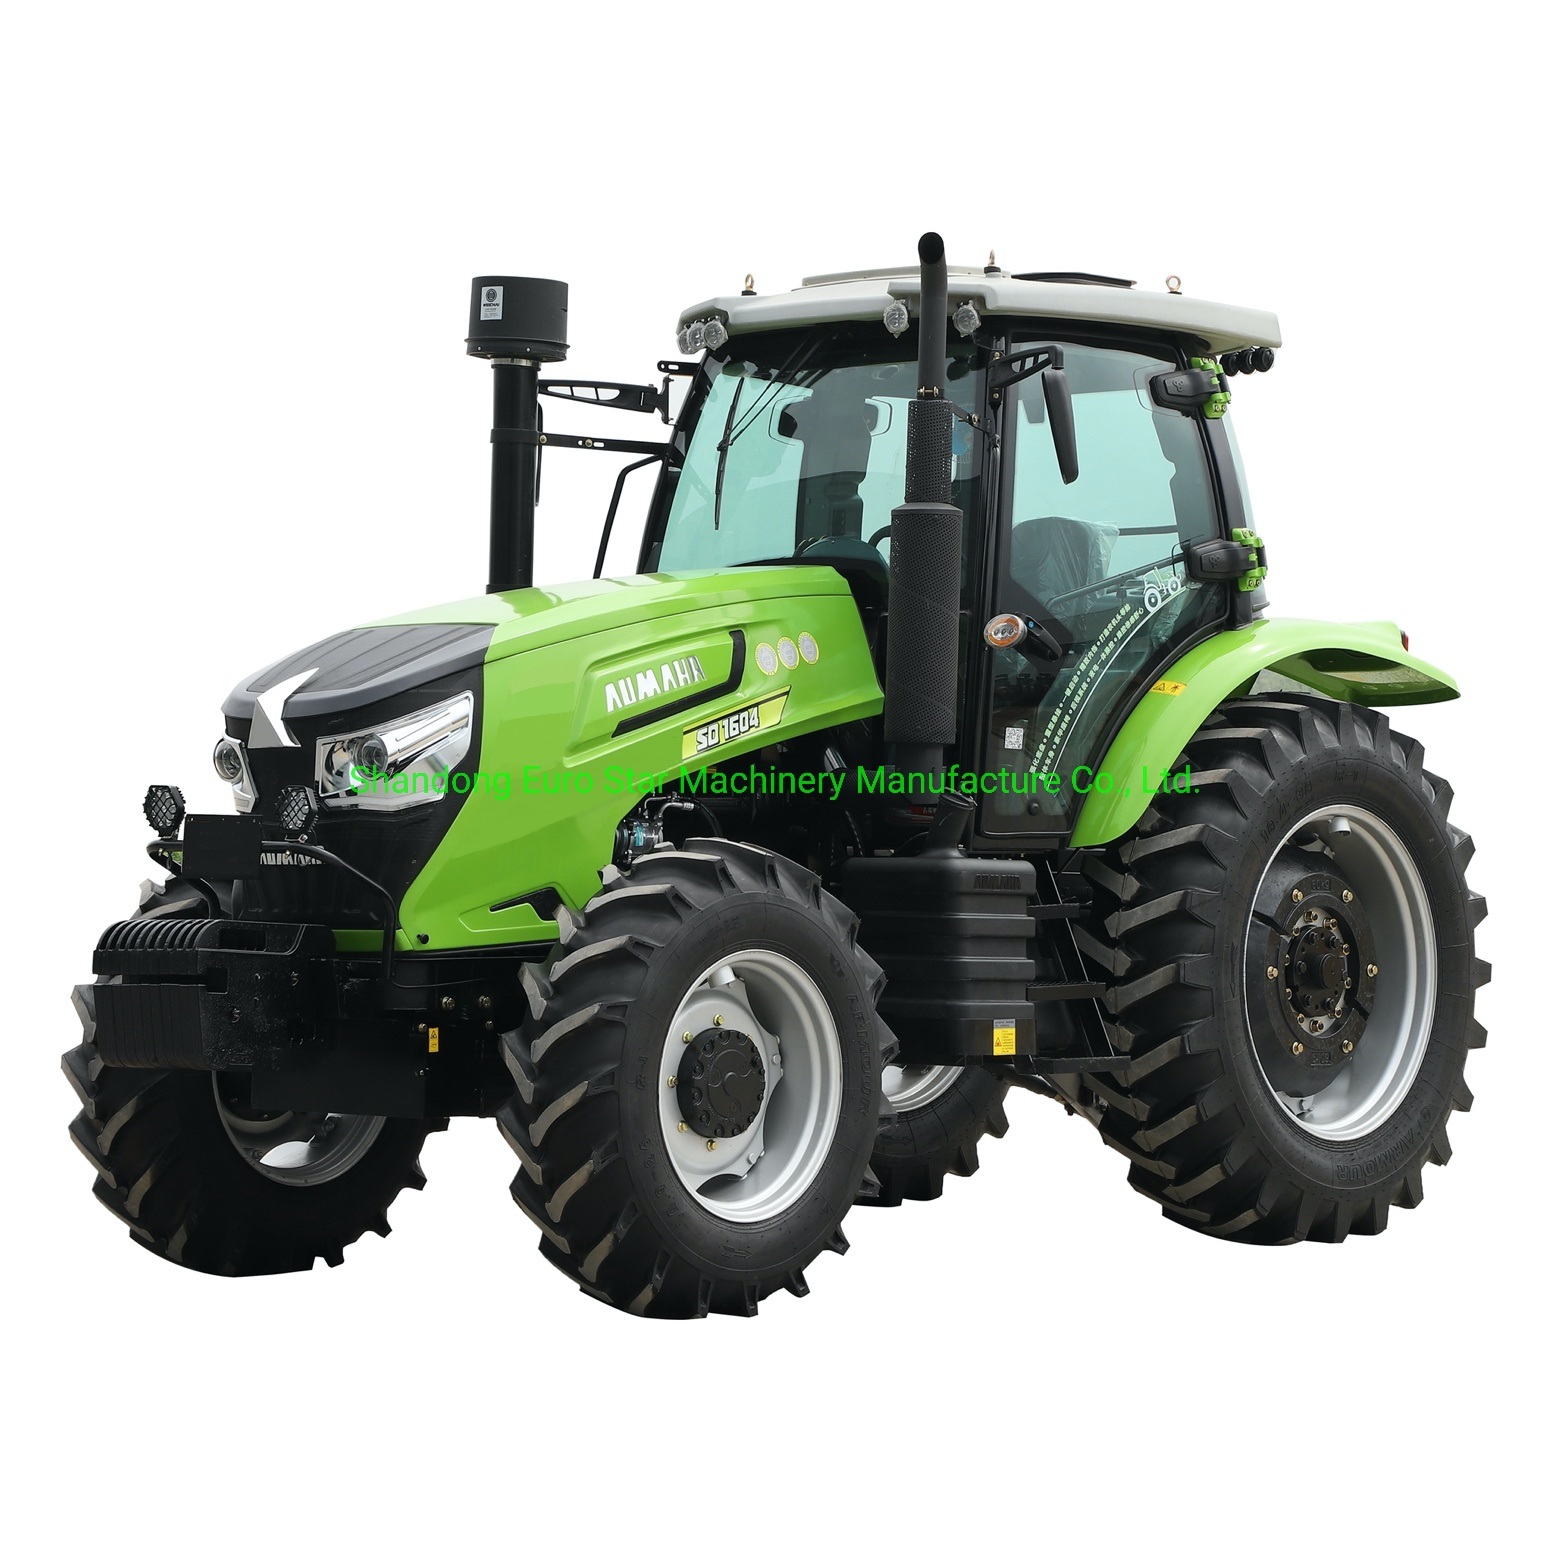 F-4WD-140HP-Wheel-Tractor-Mini-Orchard-Small-Four-Farm-Crawler-Paddy-Lawn-Big-Garden-Walking-Diesel-China-Tractor-for-Agricultural-Machinery-Machine-Es1408f-CE.jpg